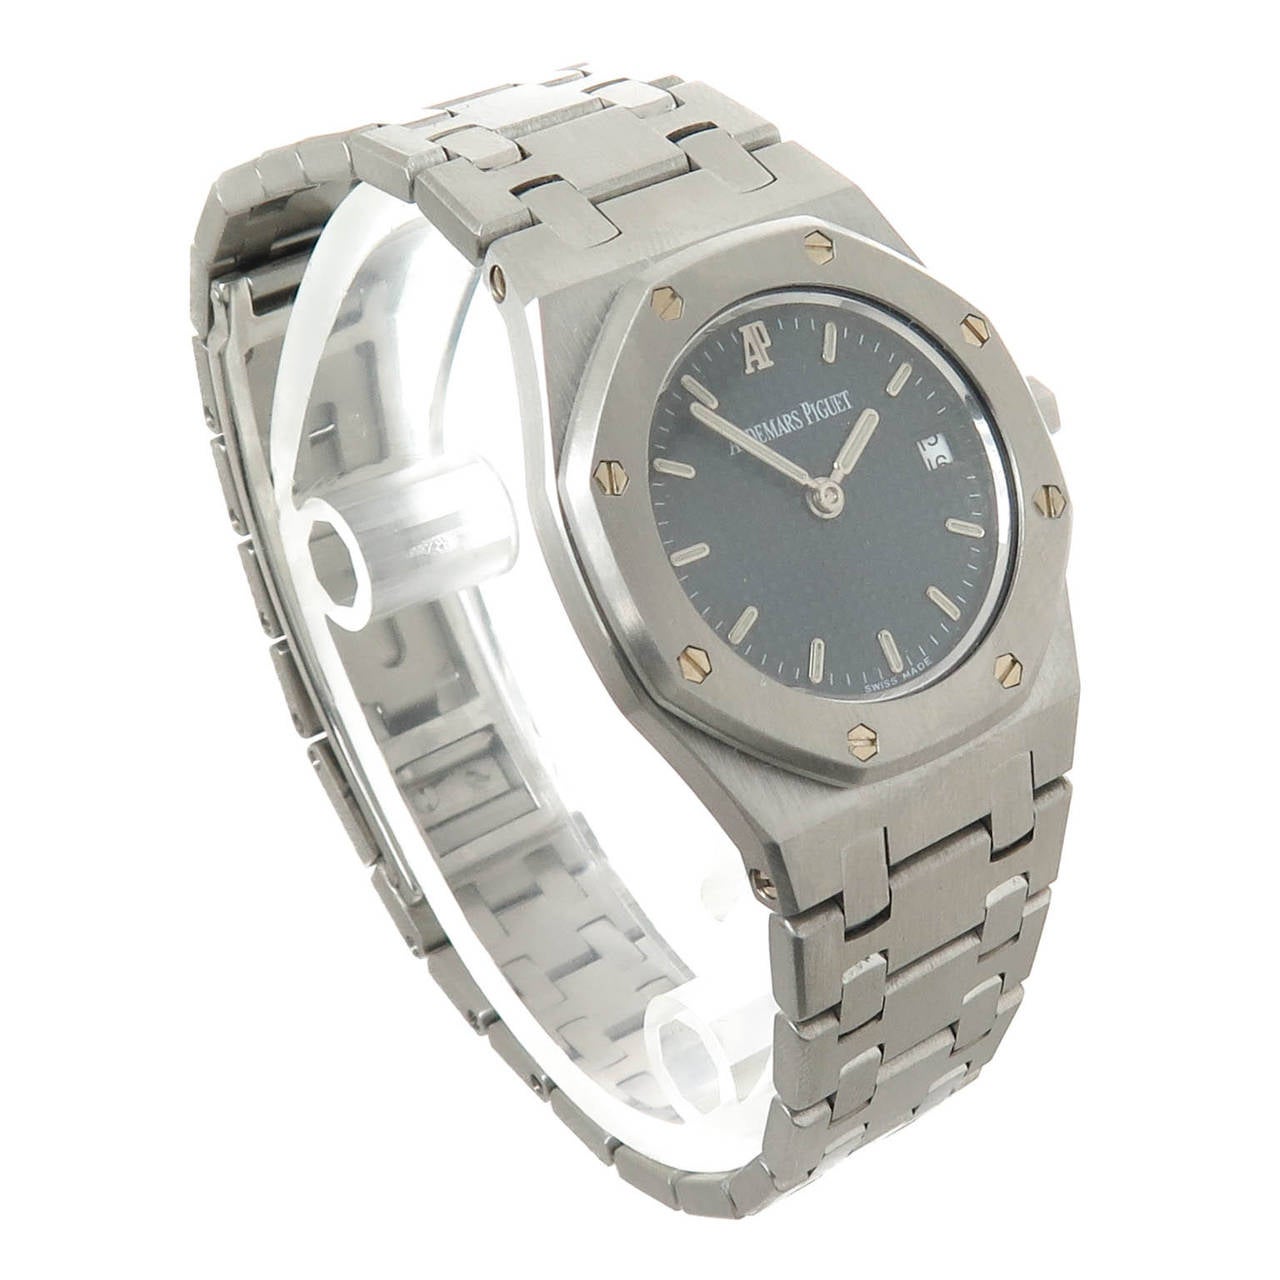 Circa 1980s Audemars Piguet Ladies Stainless Steel Royal Oak, Gray Waffle Dial with Raised Silver Markers and Calendar window at the 3 position, Quartz Movement. Steel Bracelet with deployment buckle. Original Audemars presentation box. Recently